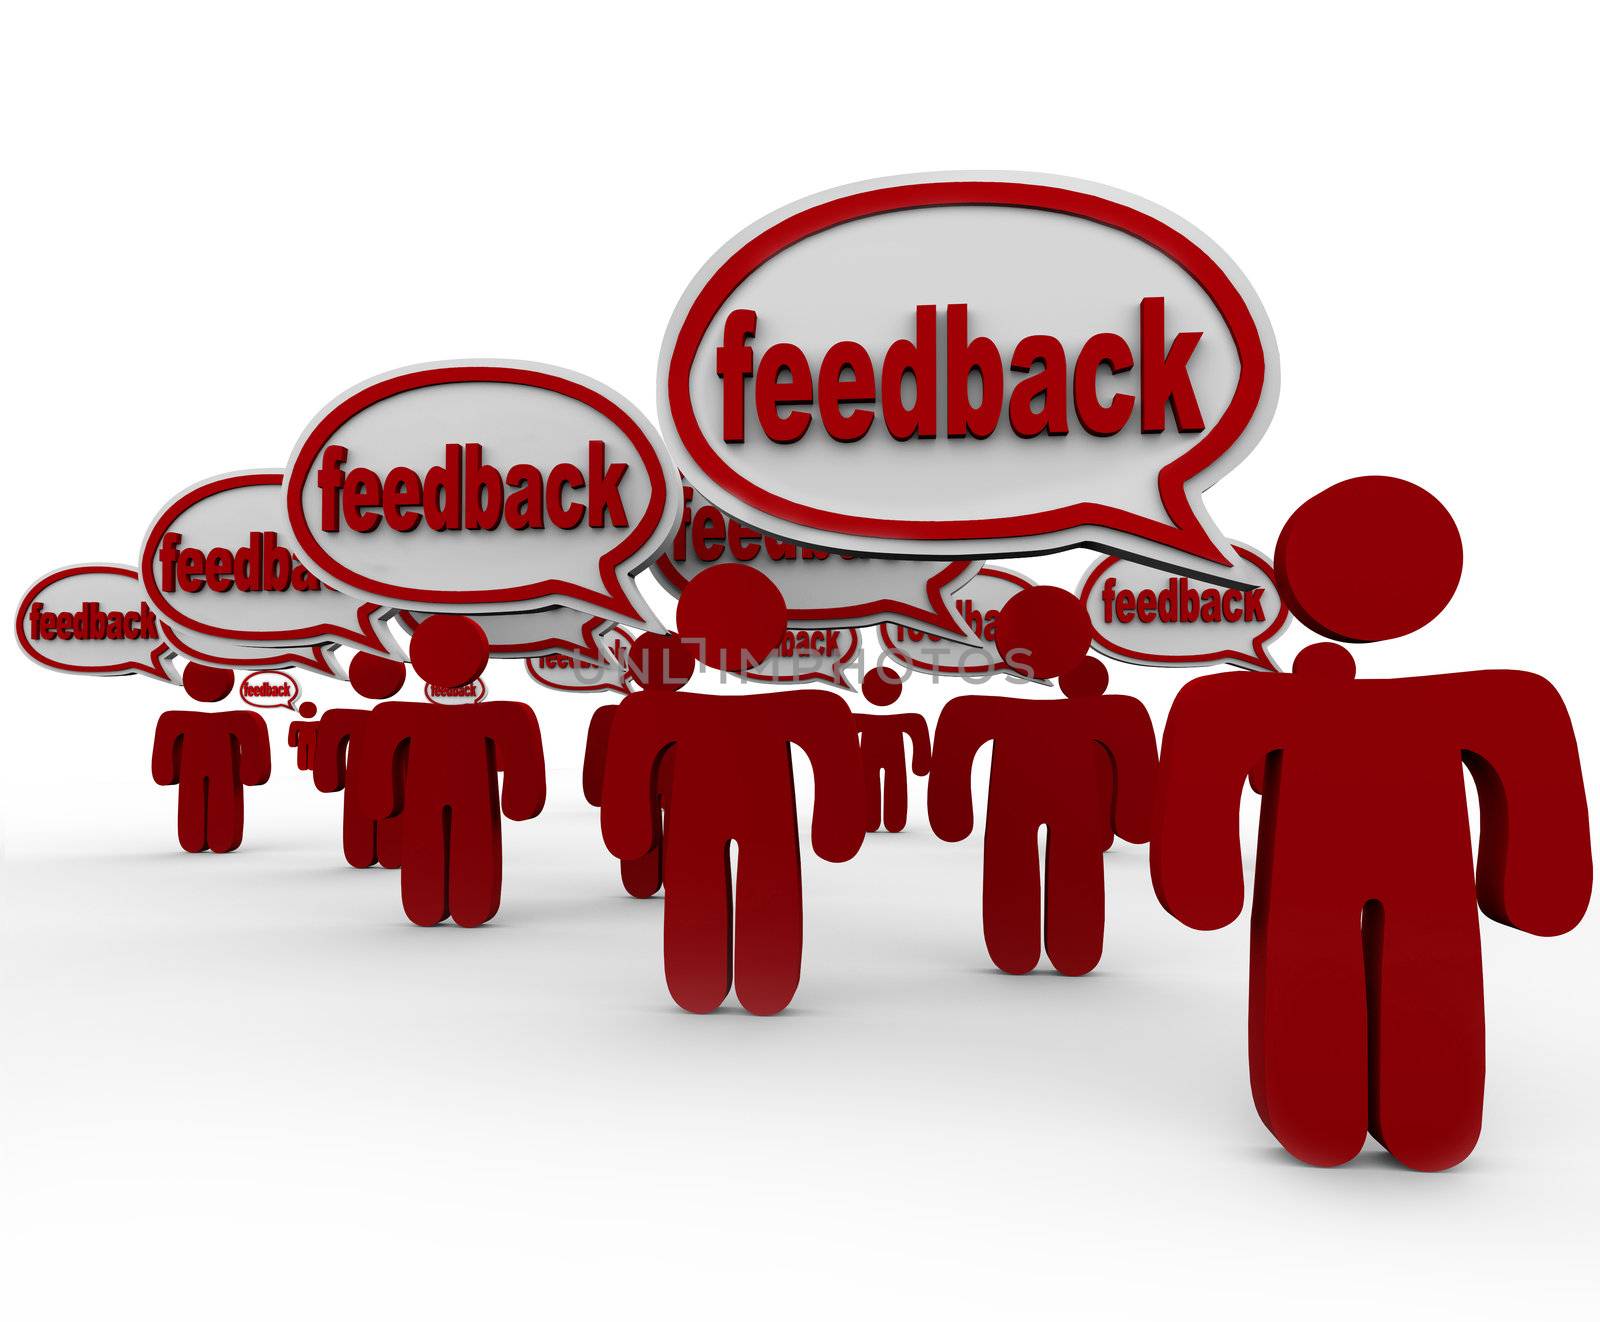 Feedback - Many People Talking and Giving Opinions by iQoncept